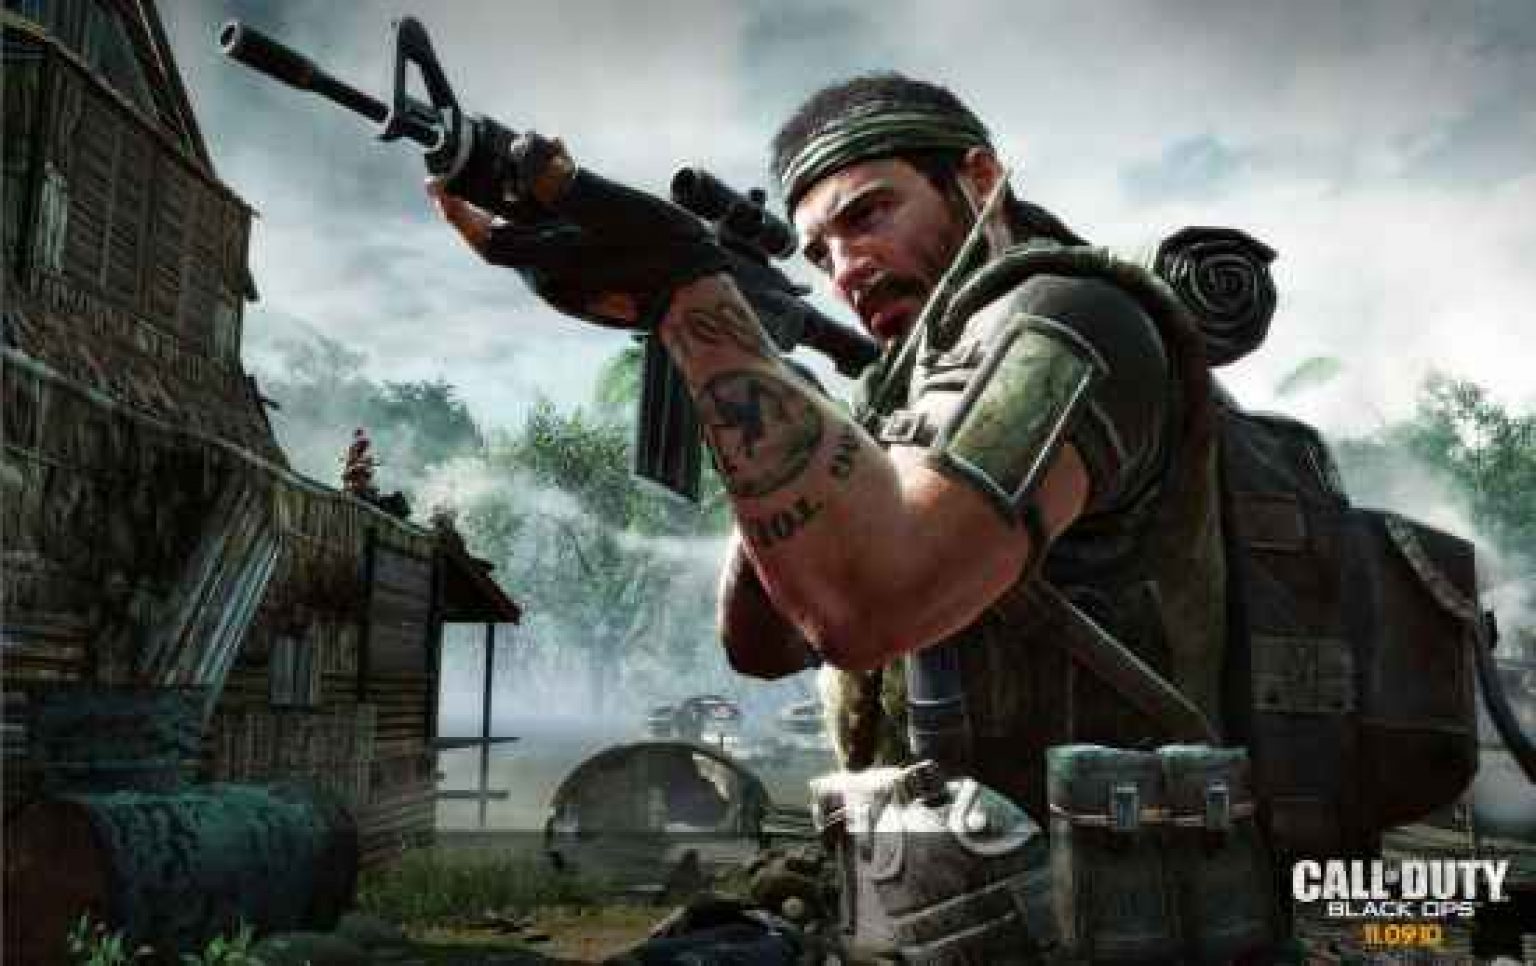 Call of Duty Black Ops 1 Download for Pc Highly Compressed 1